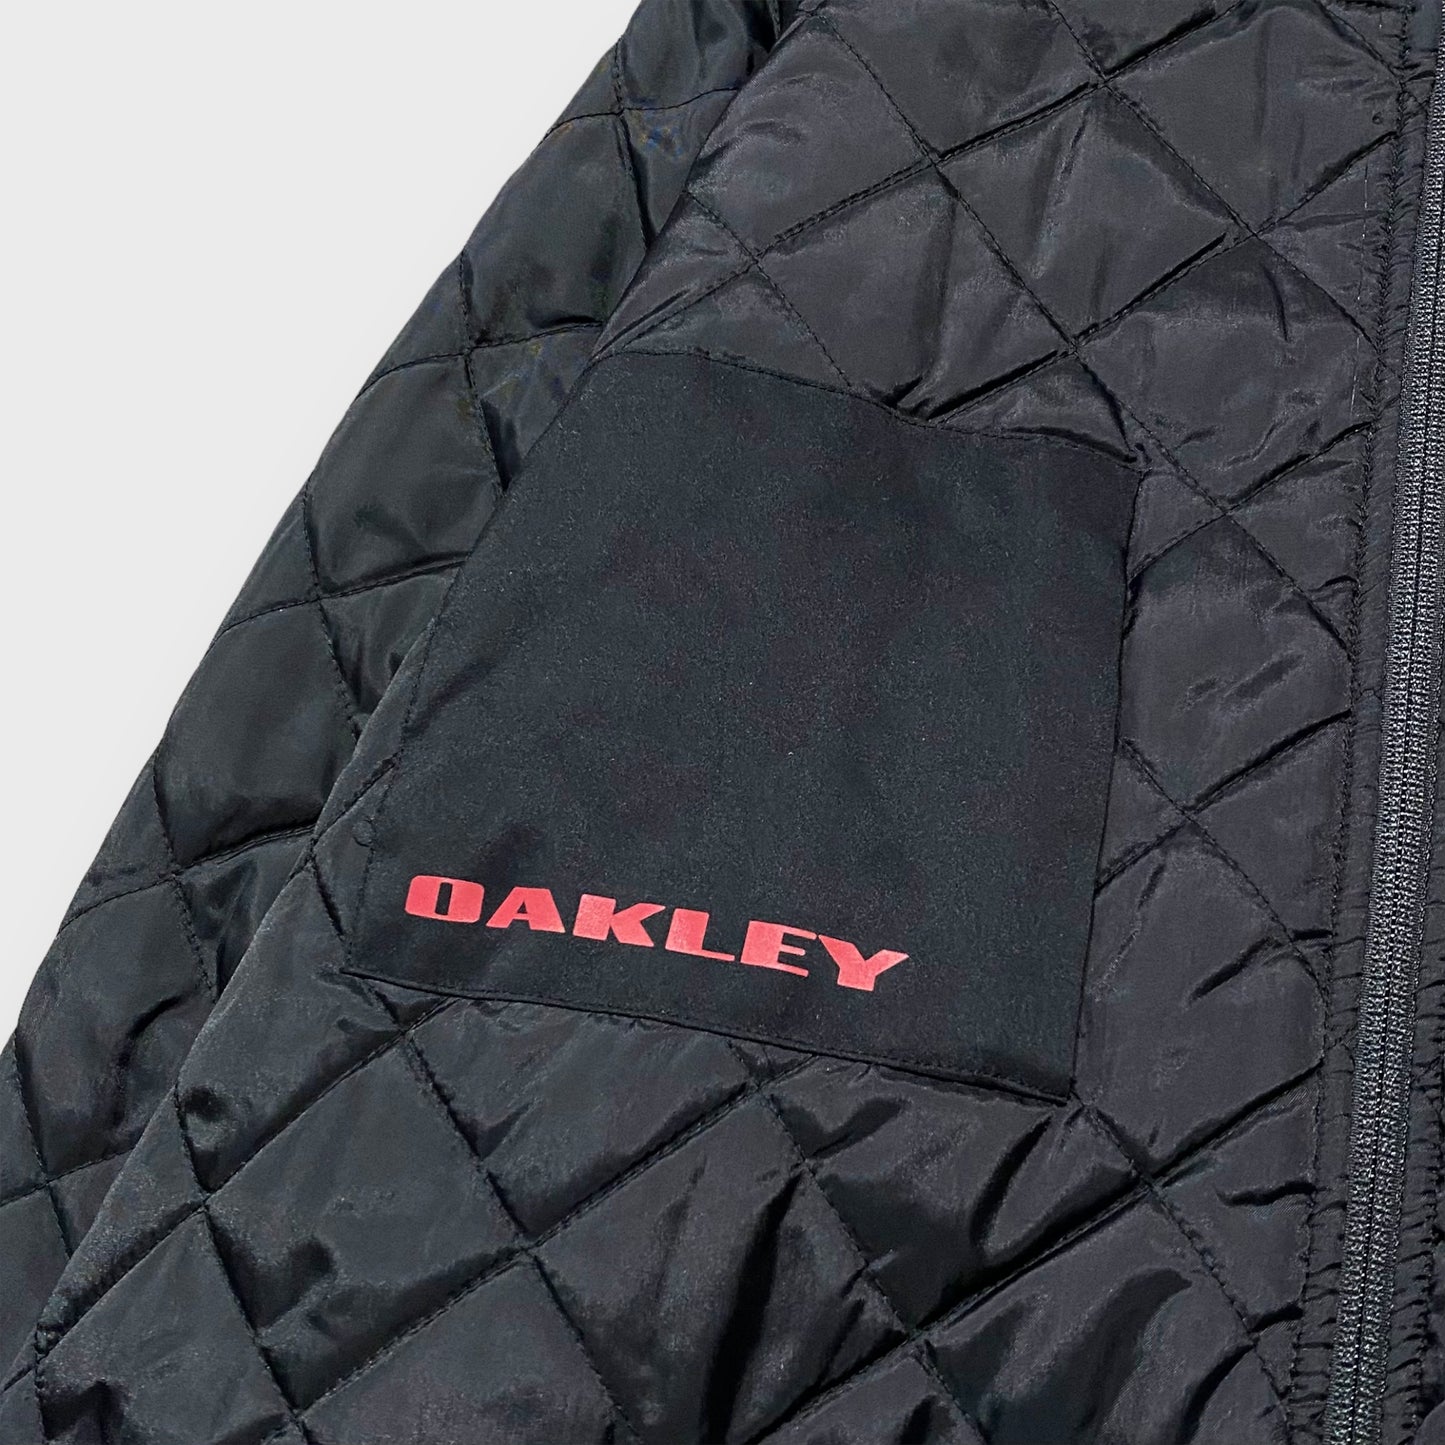 90-00's "OAKLEY" Reversible patted jacket